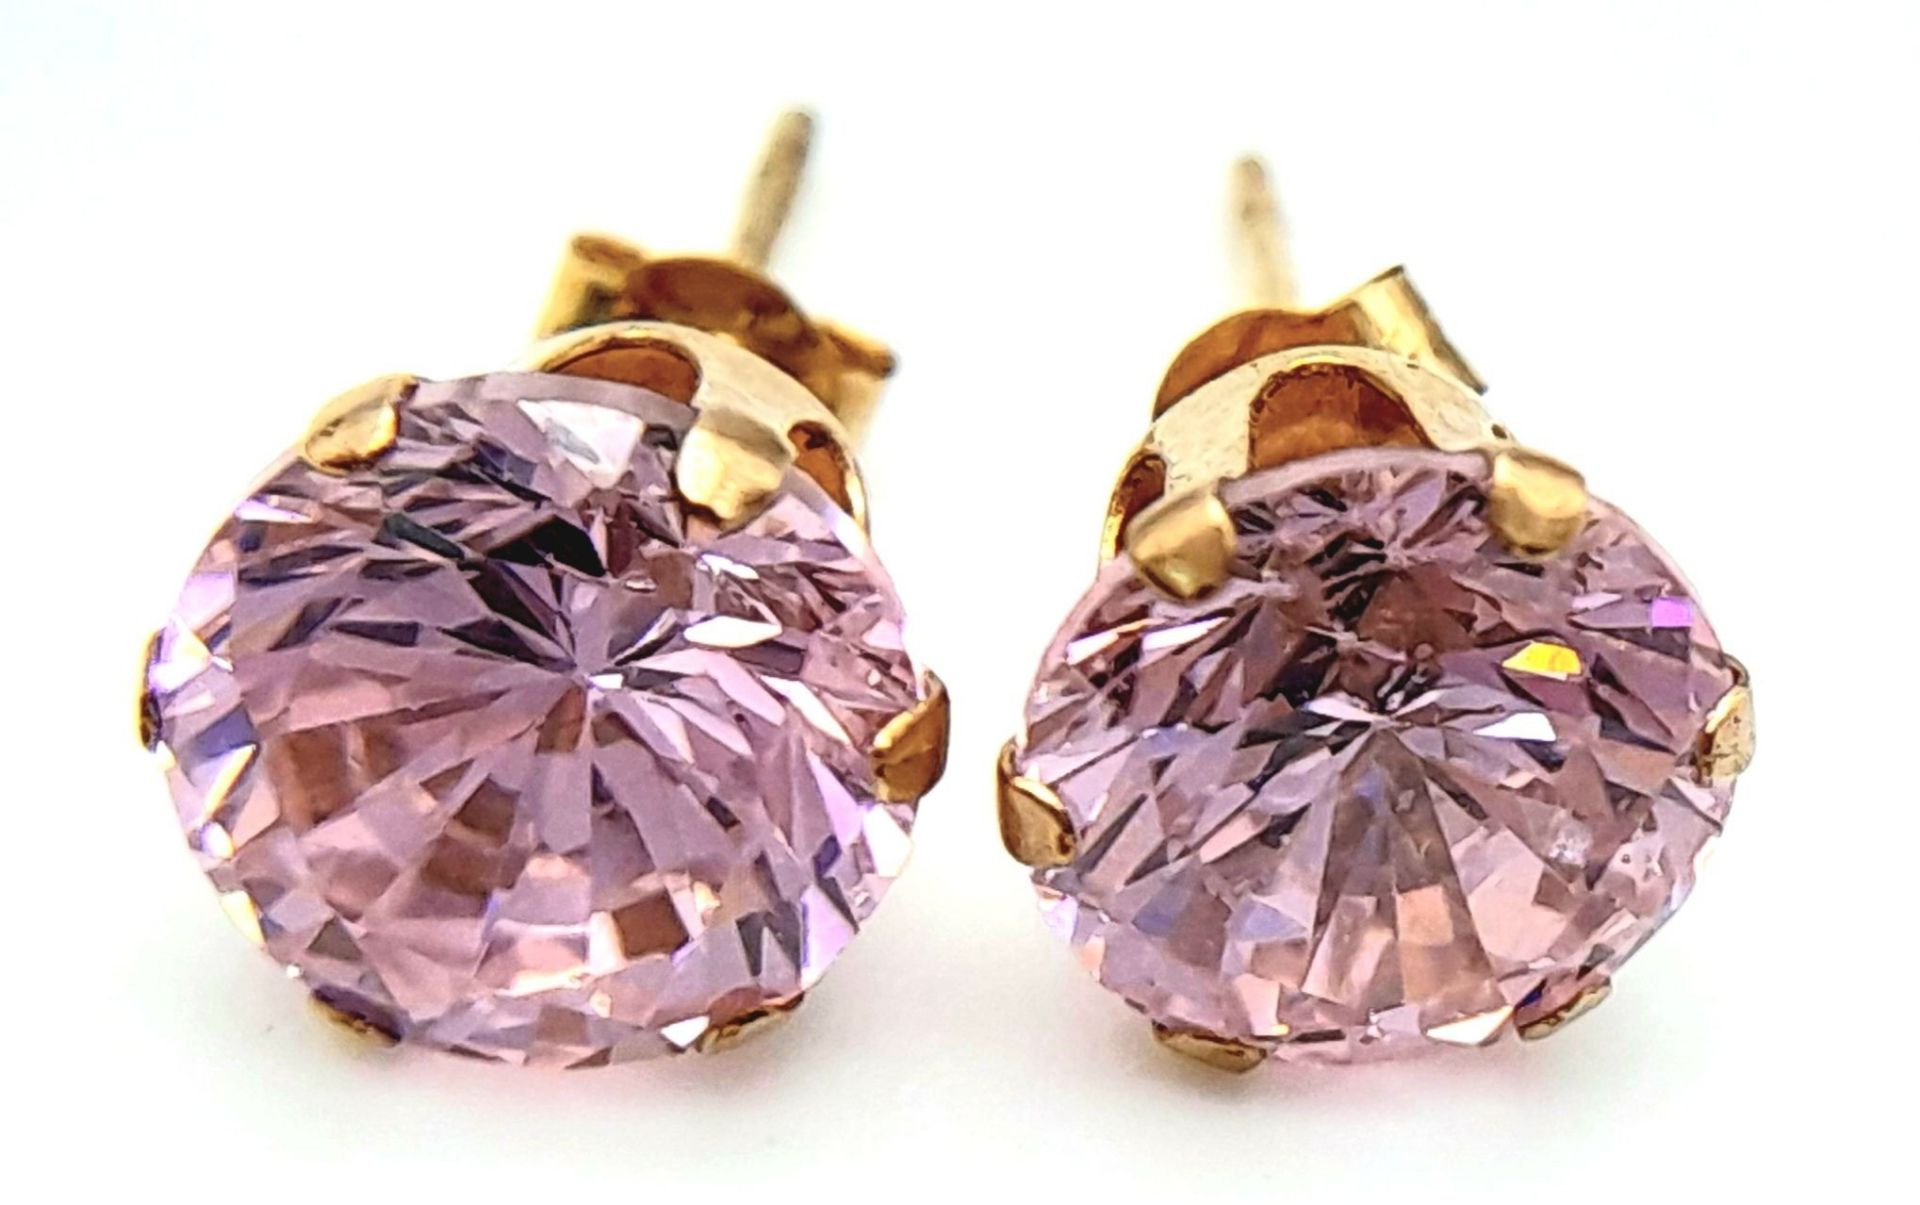 A 9 K yellow gold stud earrings with pink stones, weight: 1.4 g. - Image 2 of 5